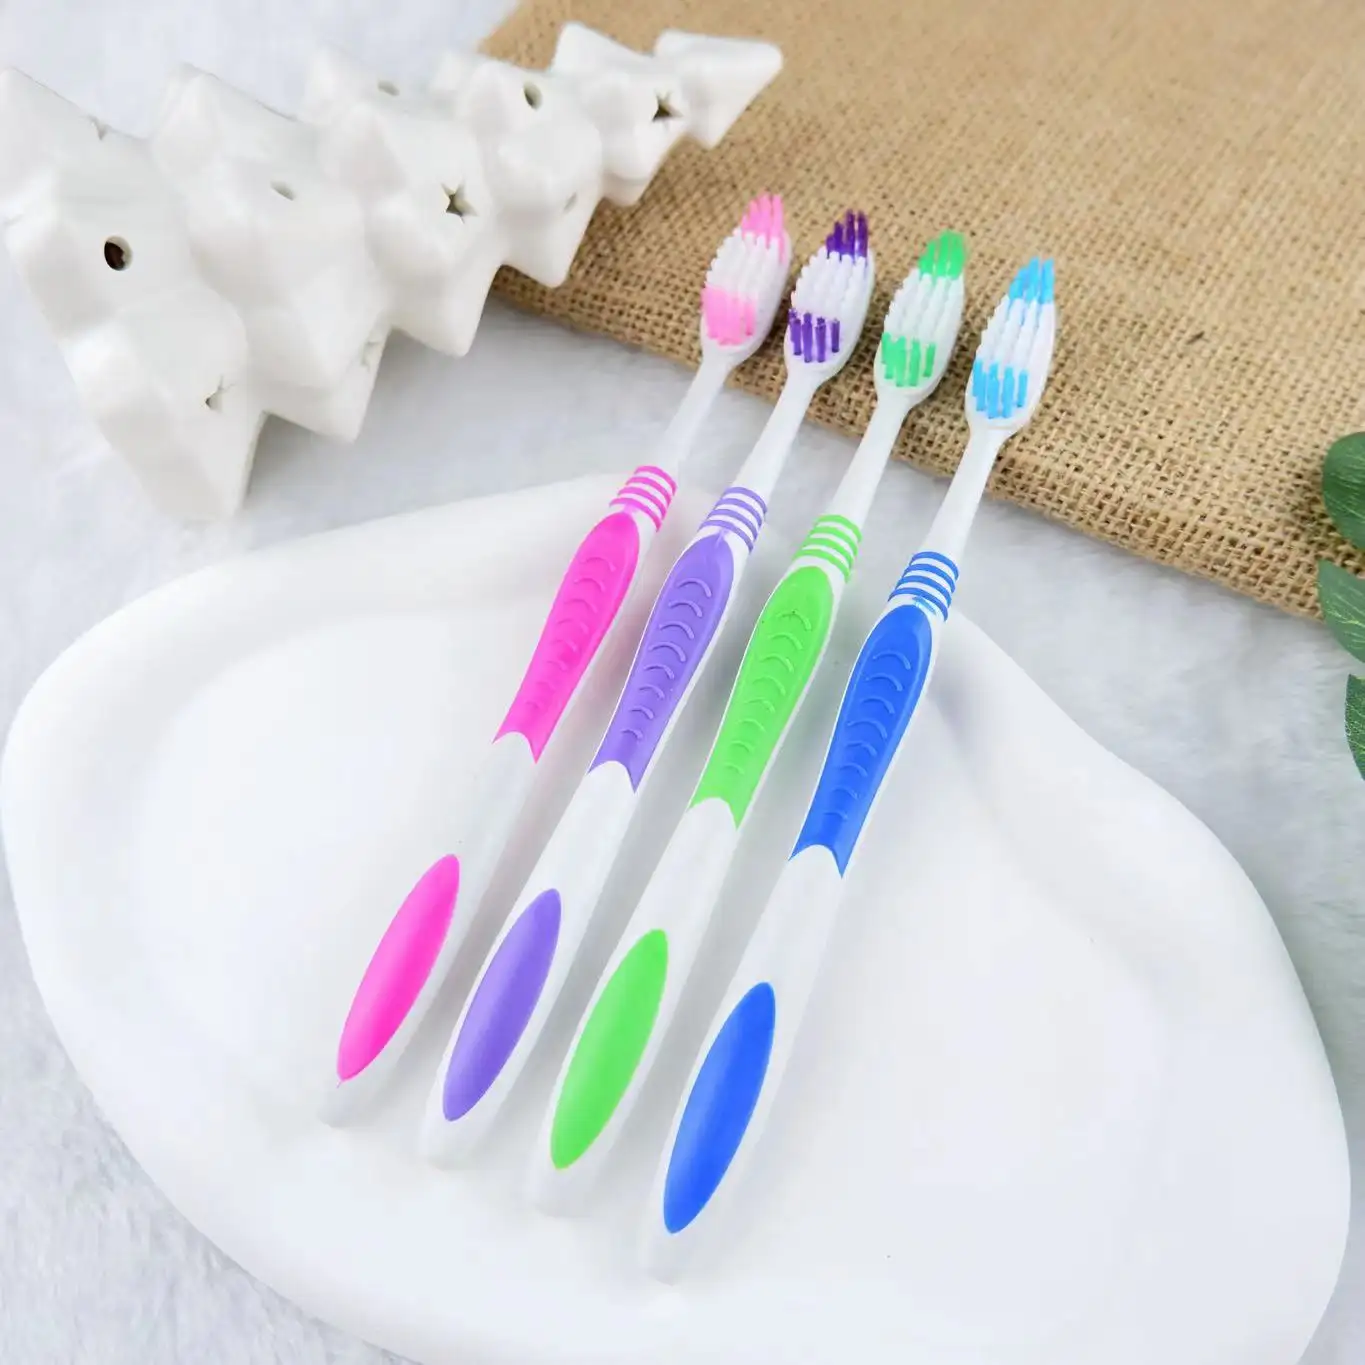 OEM/ODM 12 Pieces In 1 Blister Wholesale Cheap Toothbrush Tongue Cleaner Reusable Adult Toothbrush